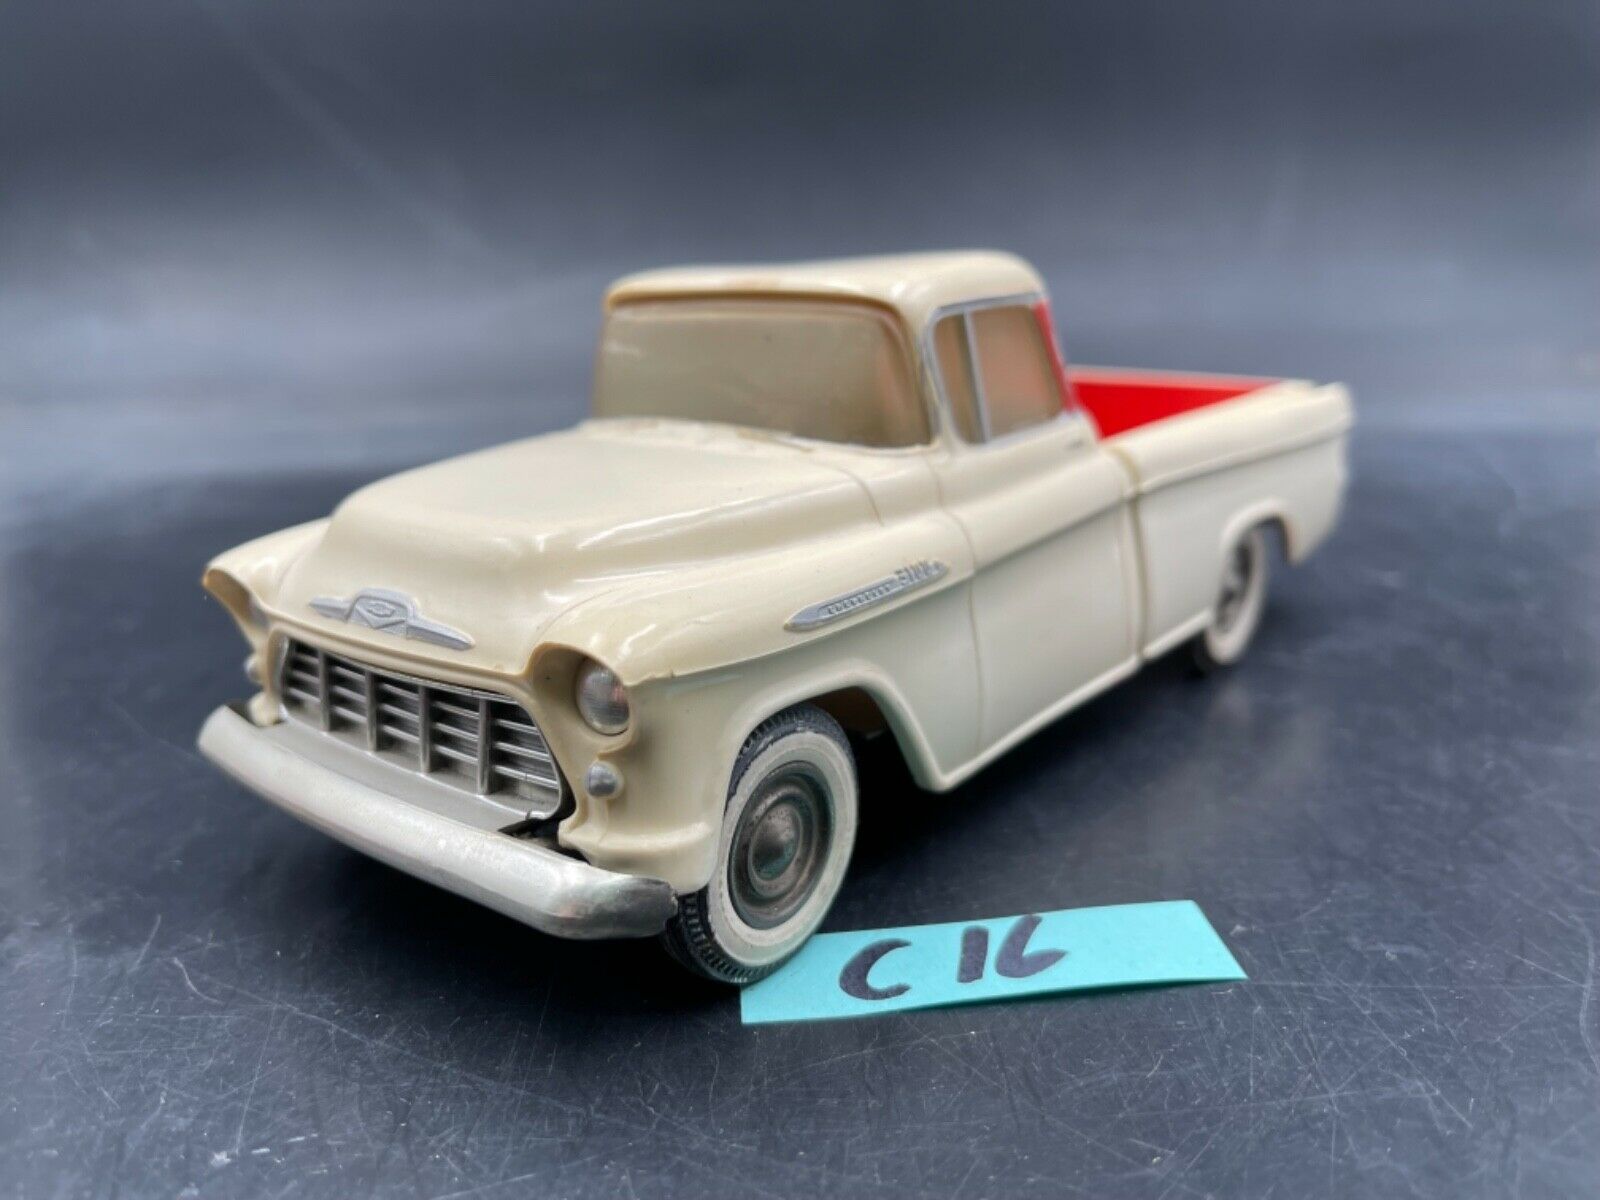 C16 Smp 1955 Chevy 3100 Pickup Off White Truck Vintage Promo Model 1/25 Mcm